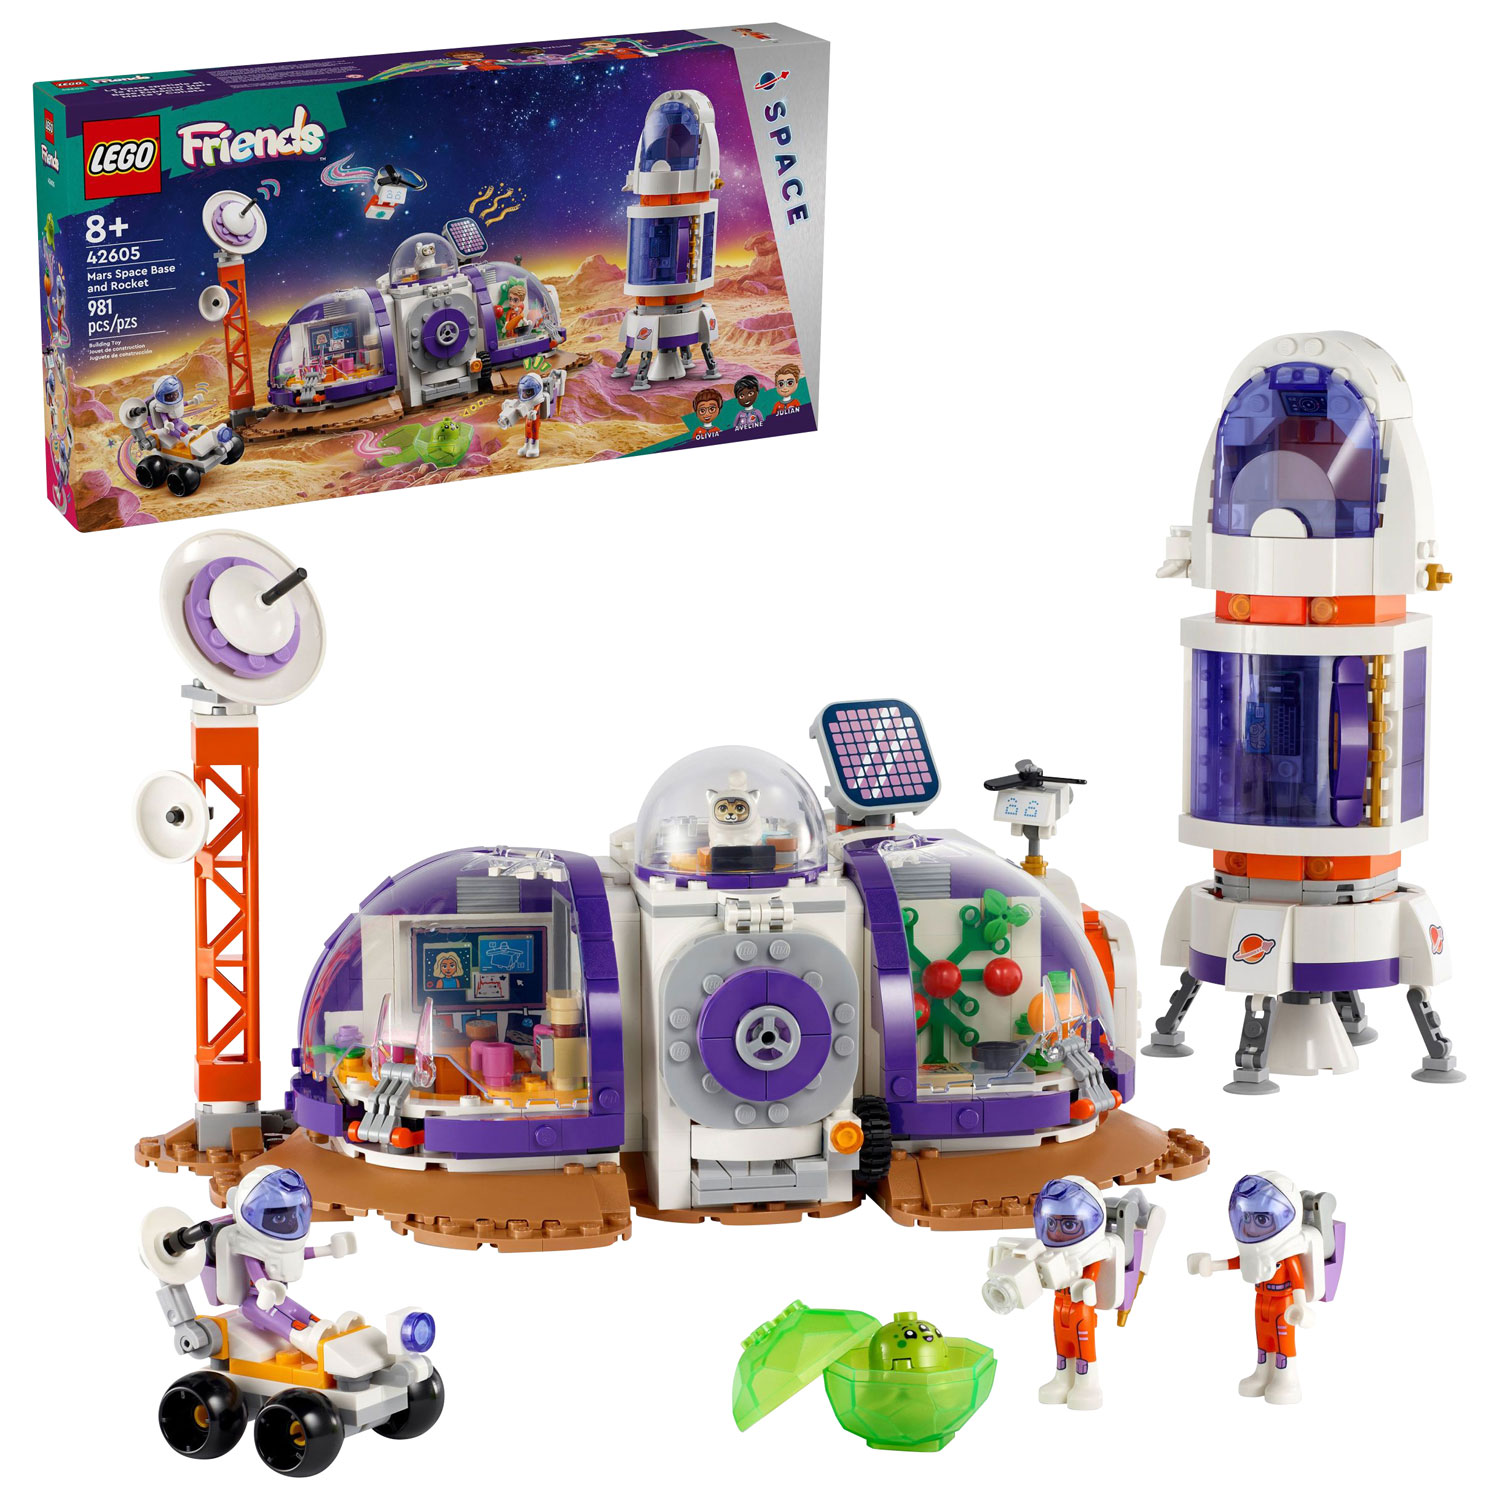 LEGO Friends: Mars Space Base and Rocket - 981 Pieces (42605)